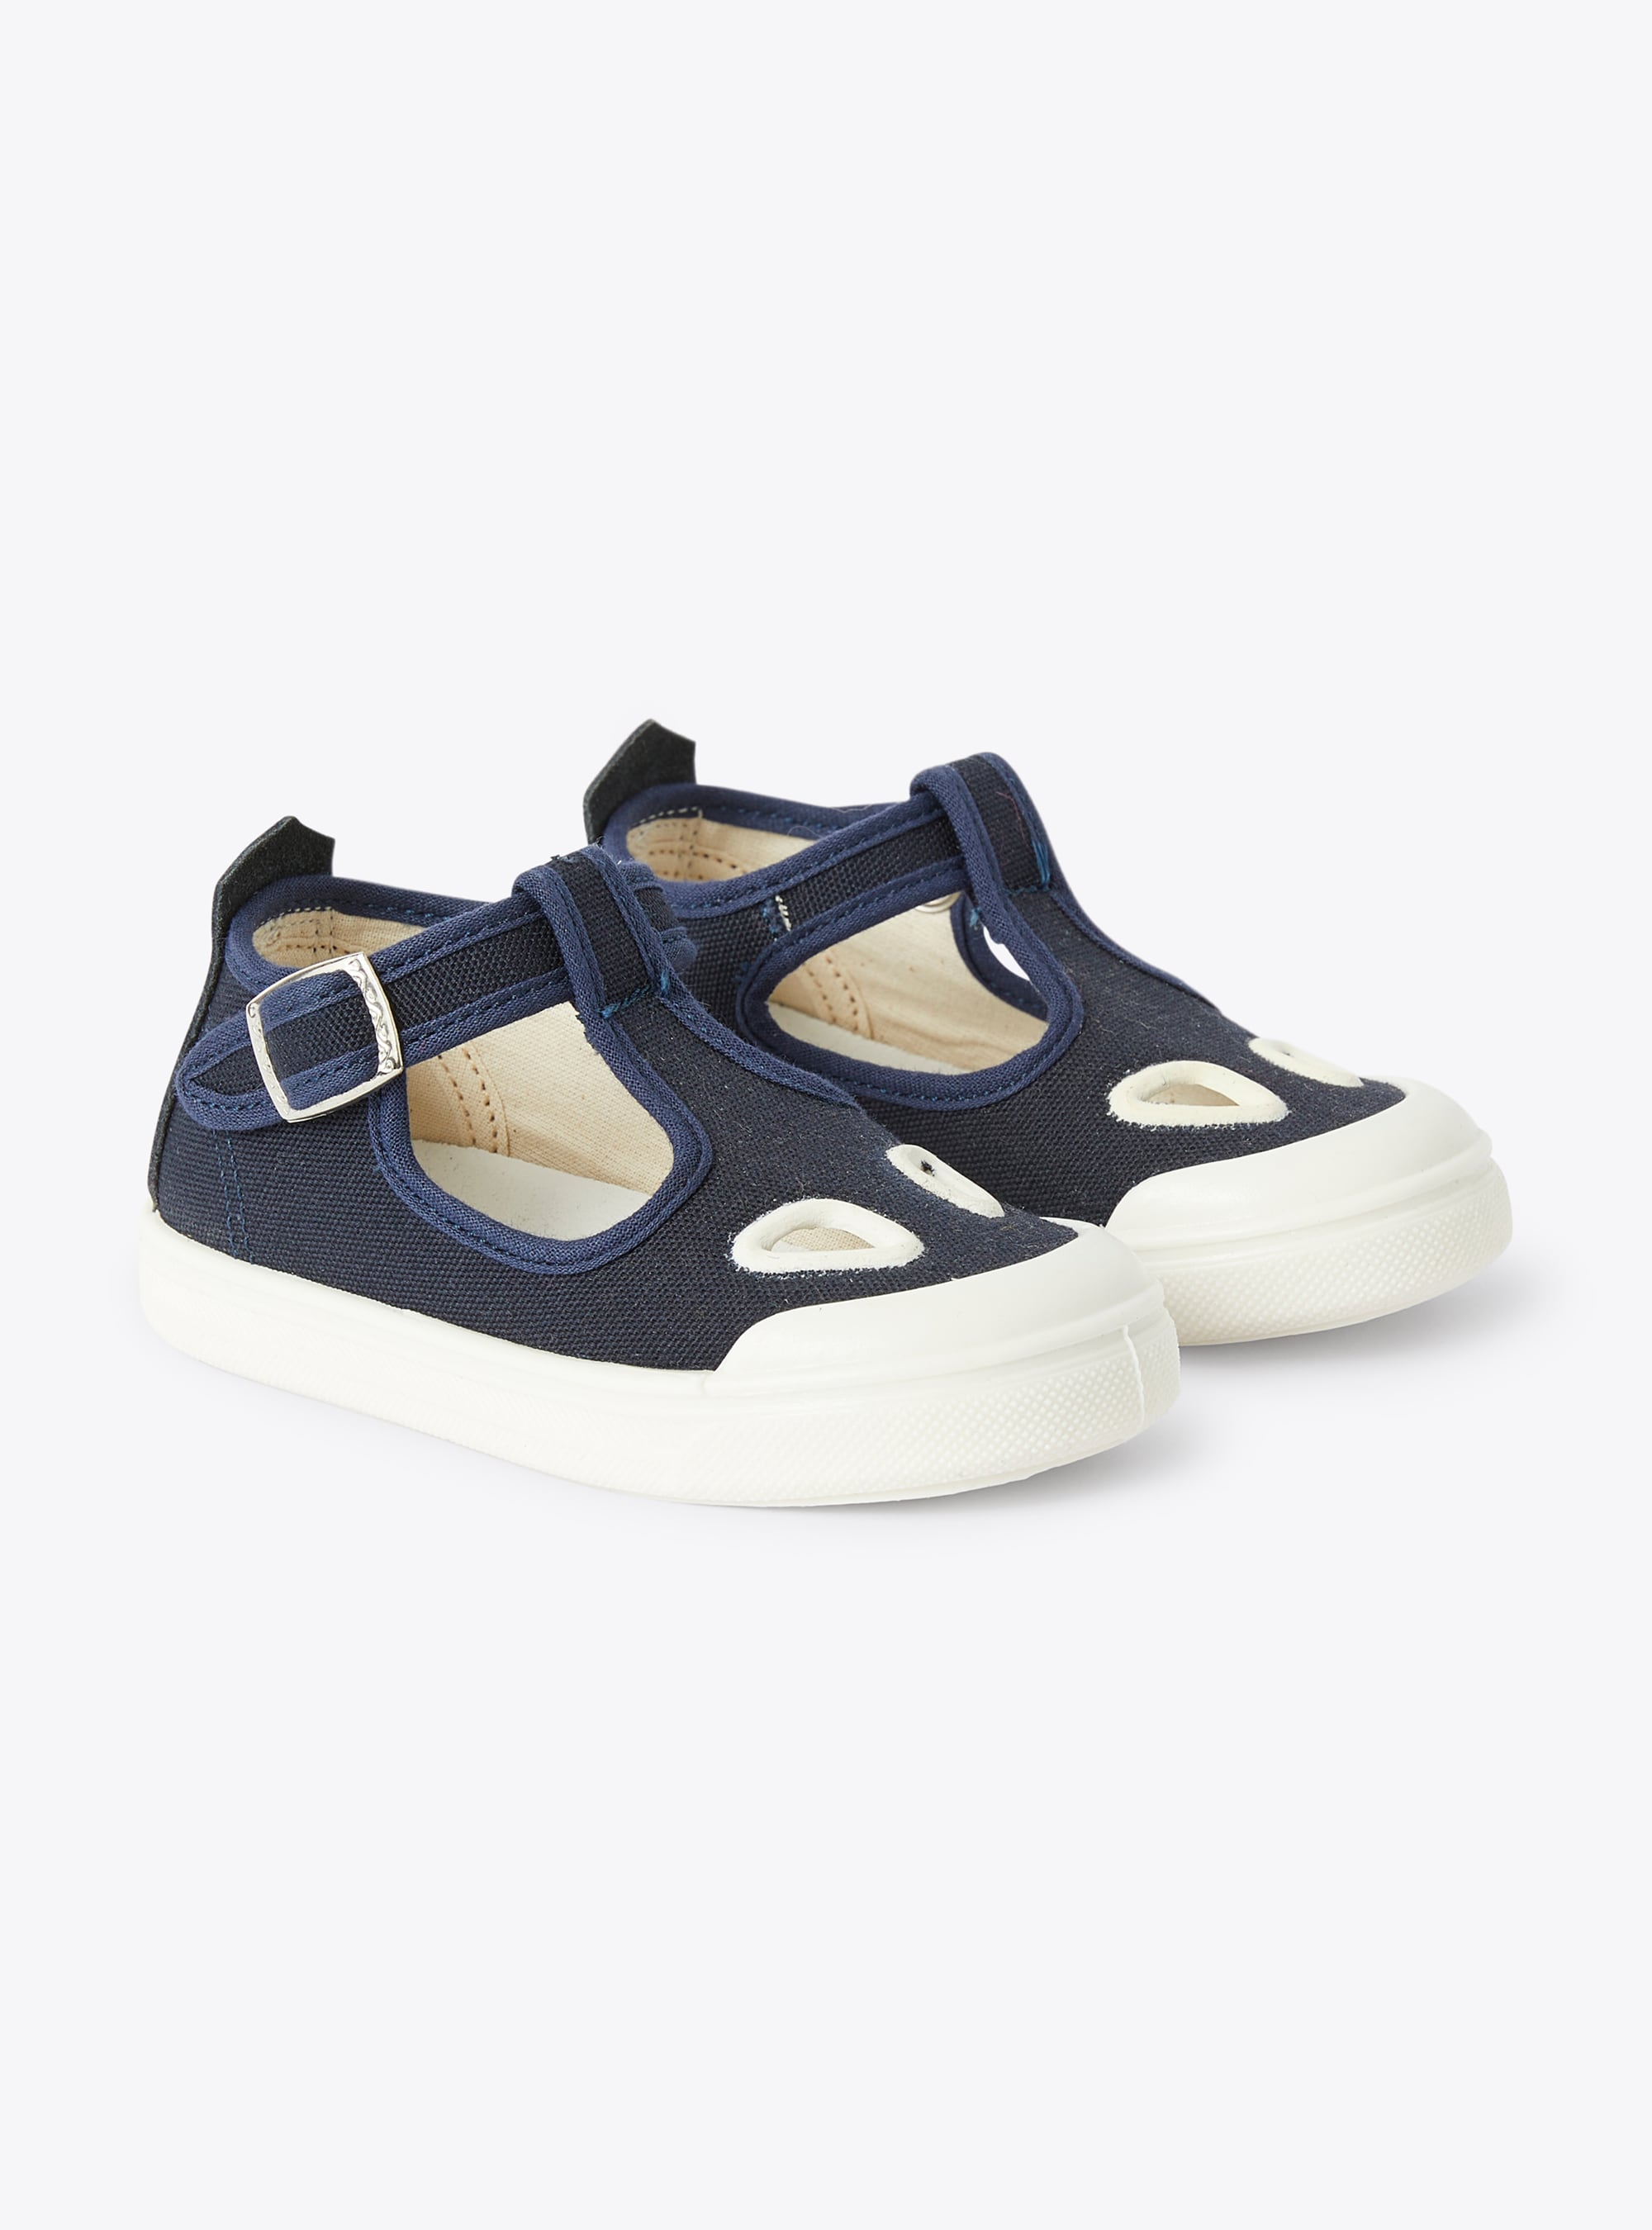 Sandal in blue canvas with a t-bar design and decorative holes - Blue | Il Gufo